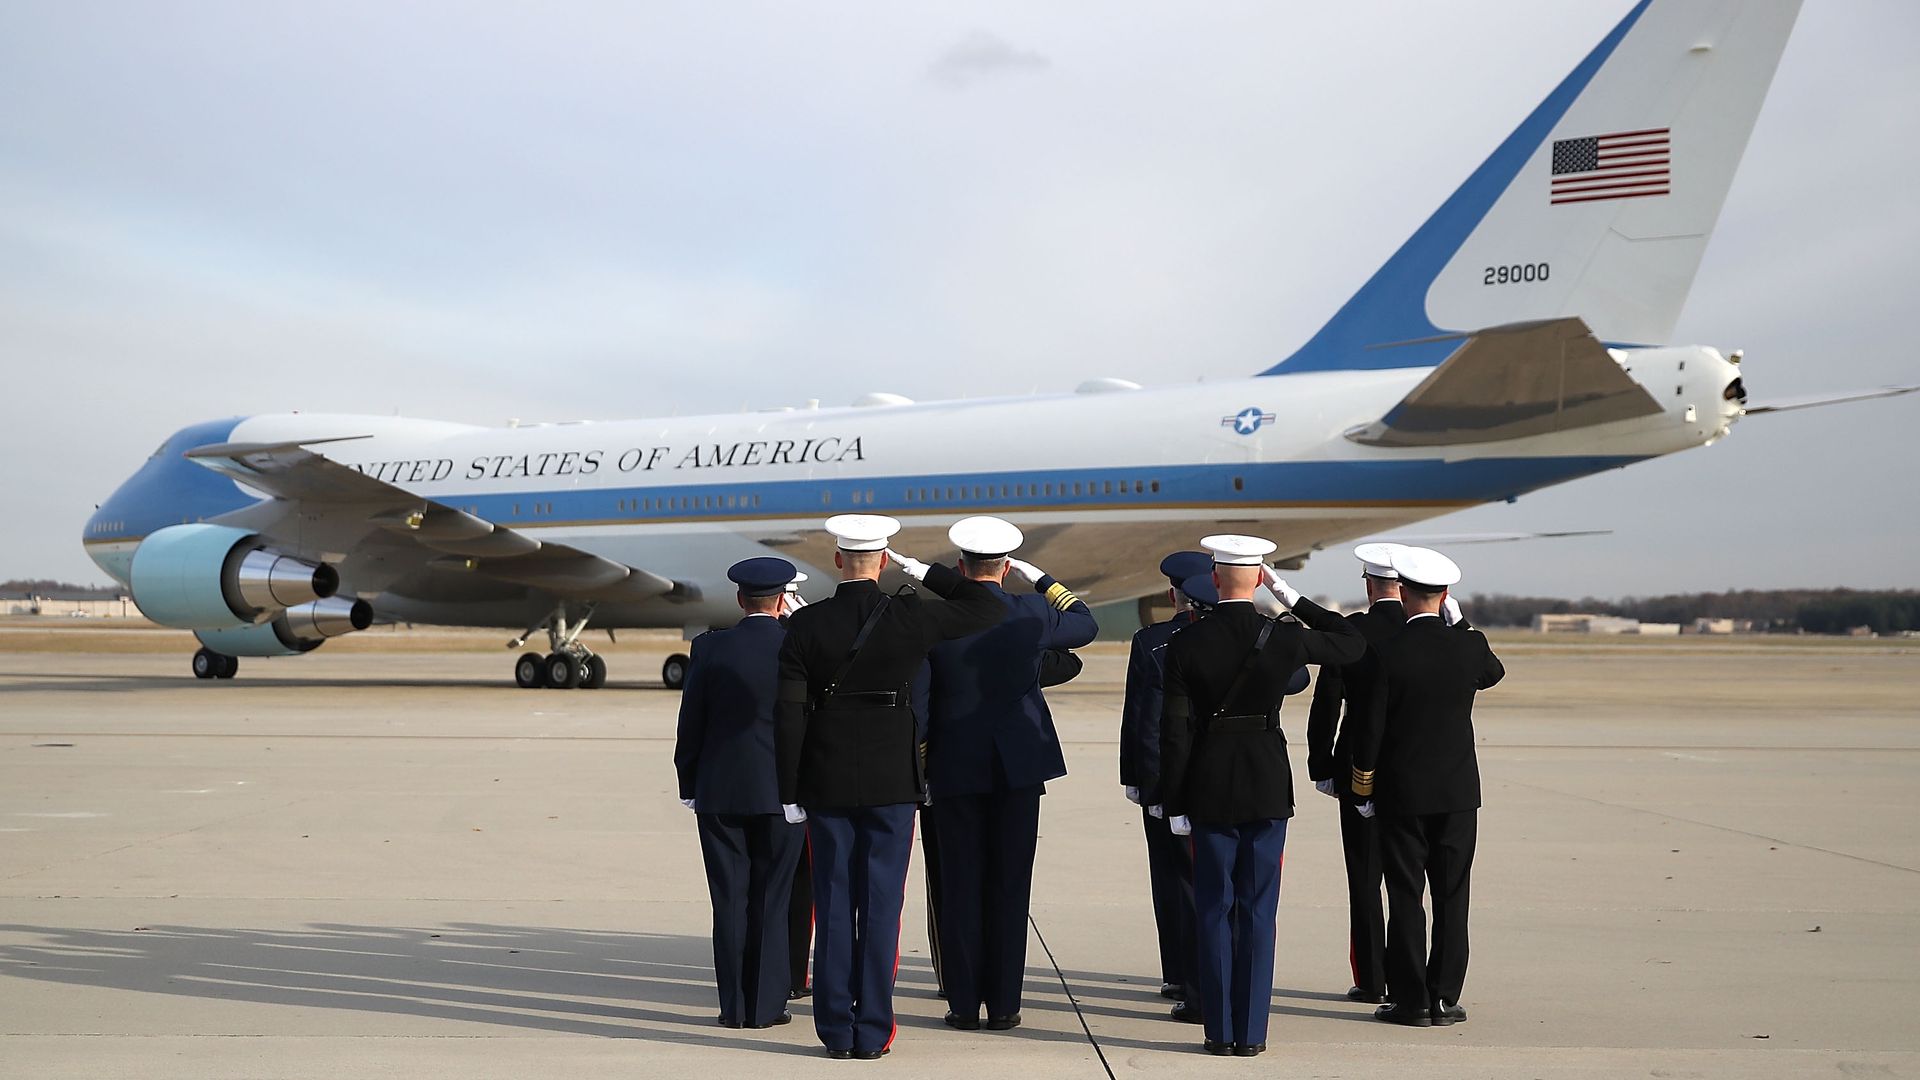 Troops salute Air Force One with George H. W. Bush casket on it.